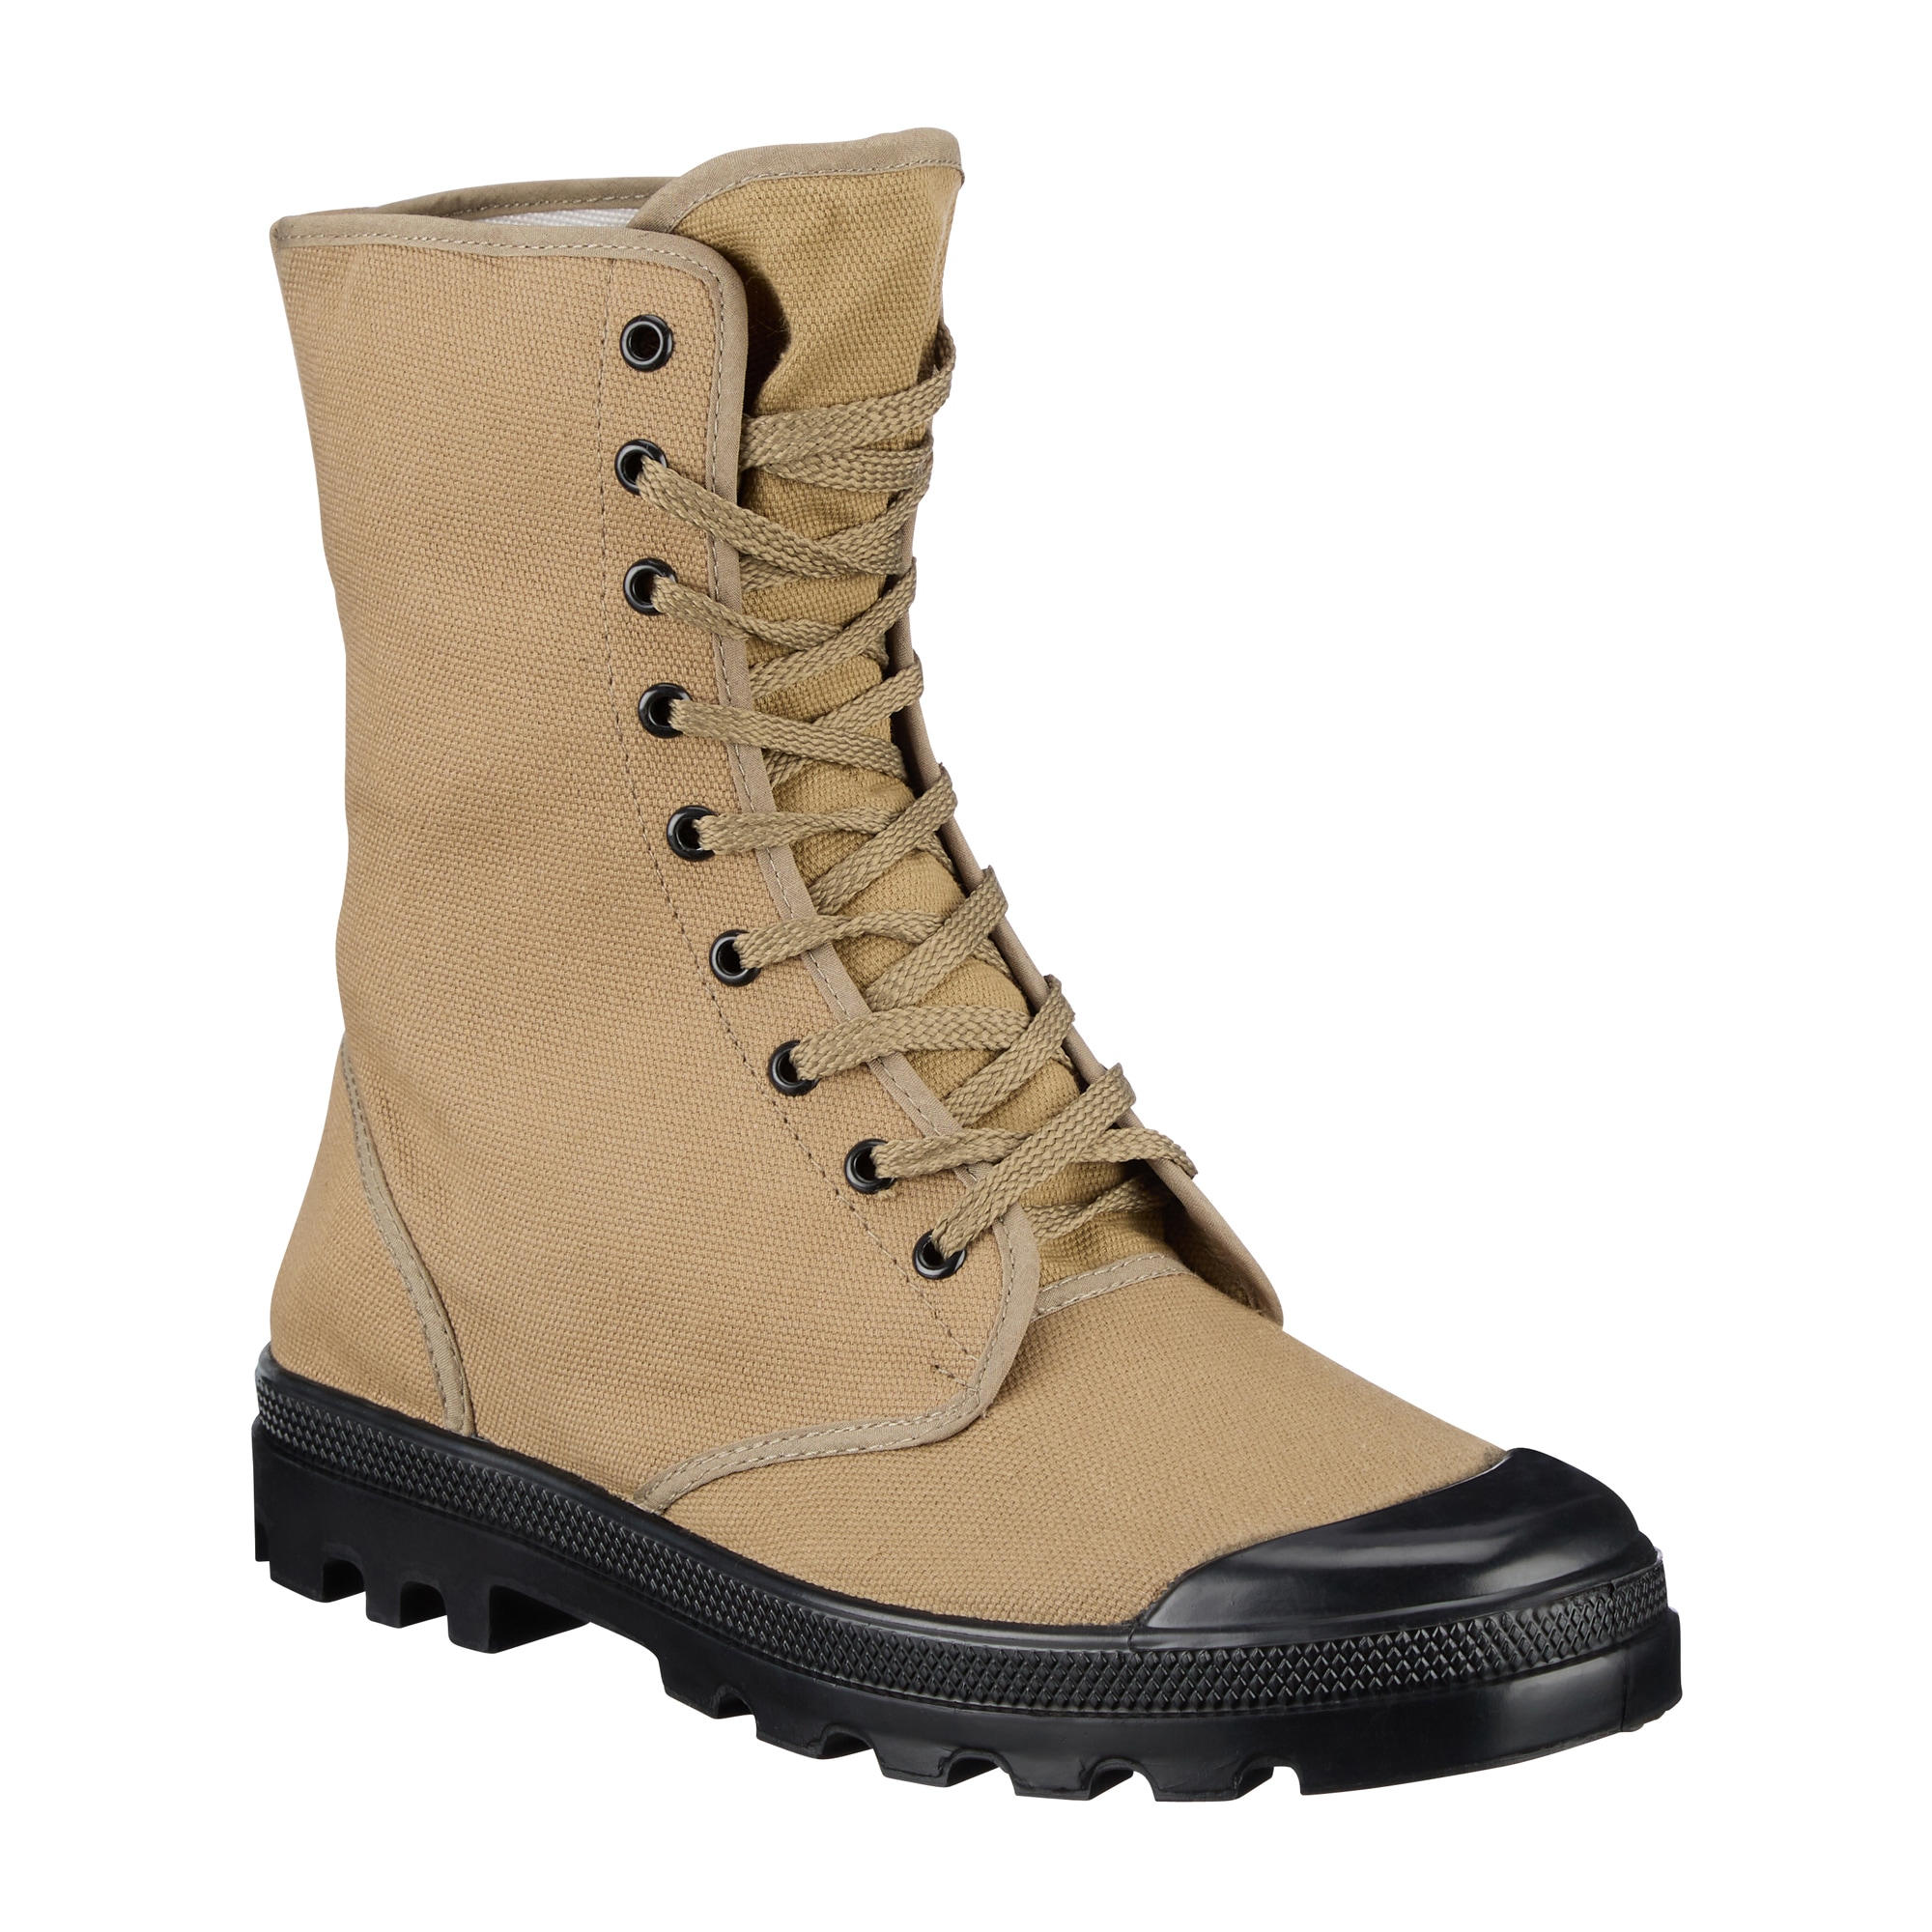 french combat boots